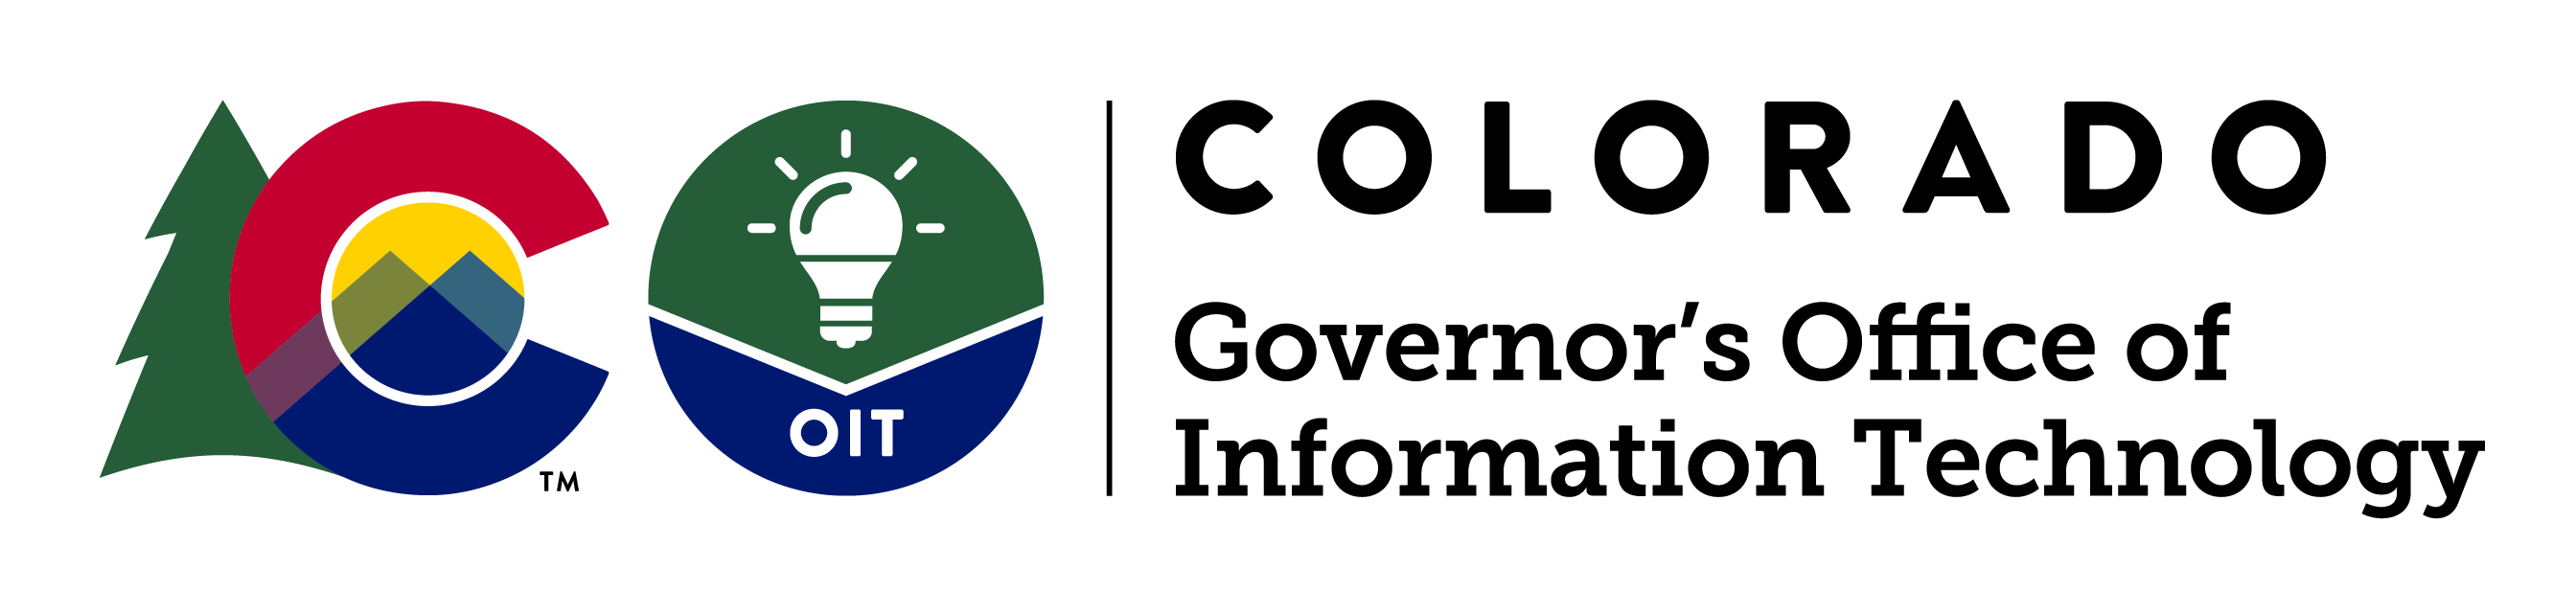 Colorado Governor's Office of Information Technology logo